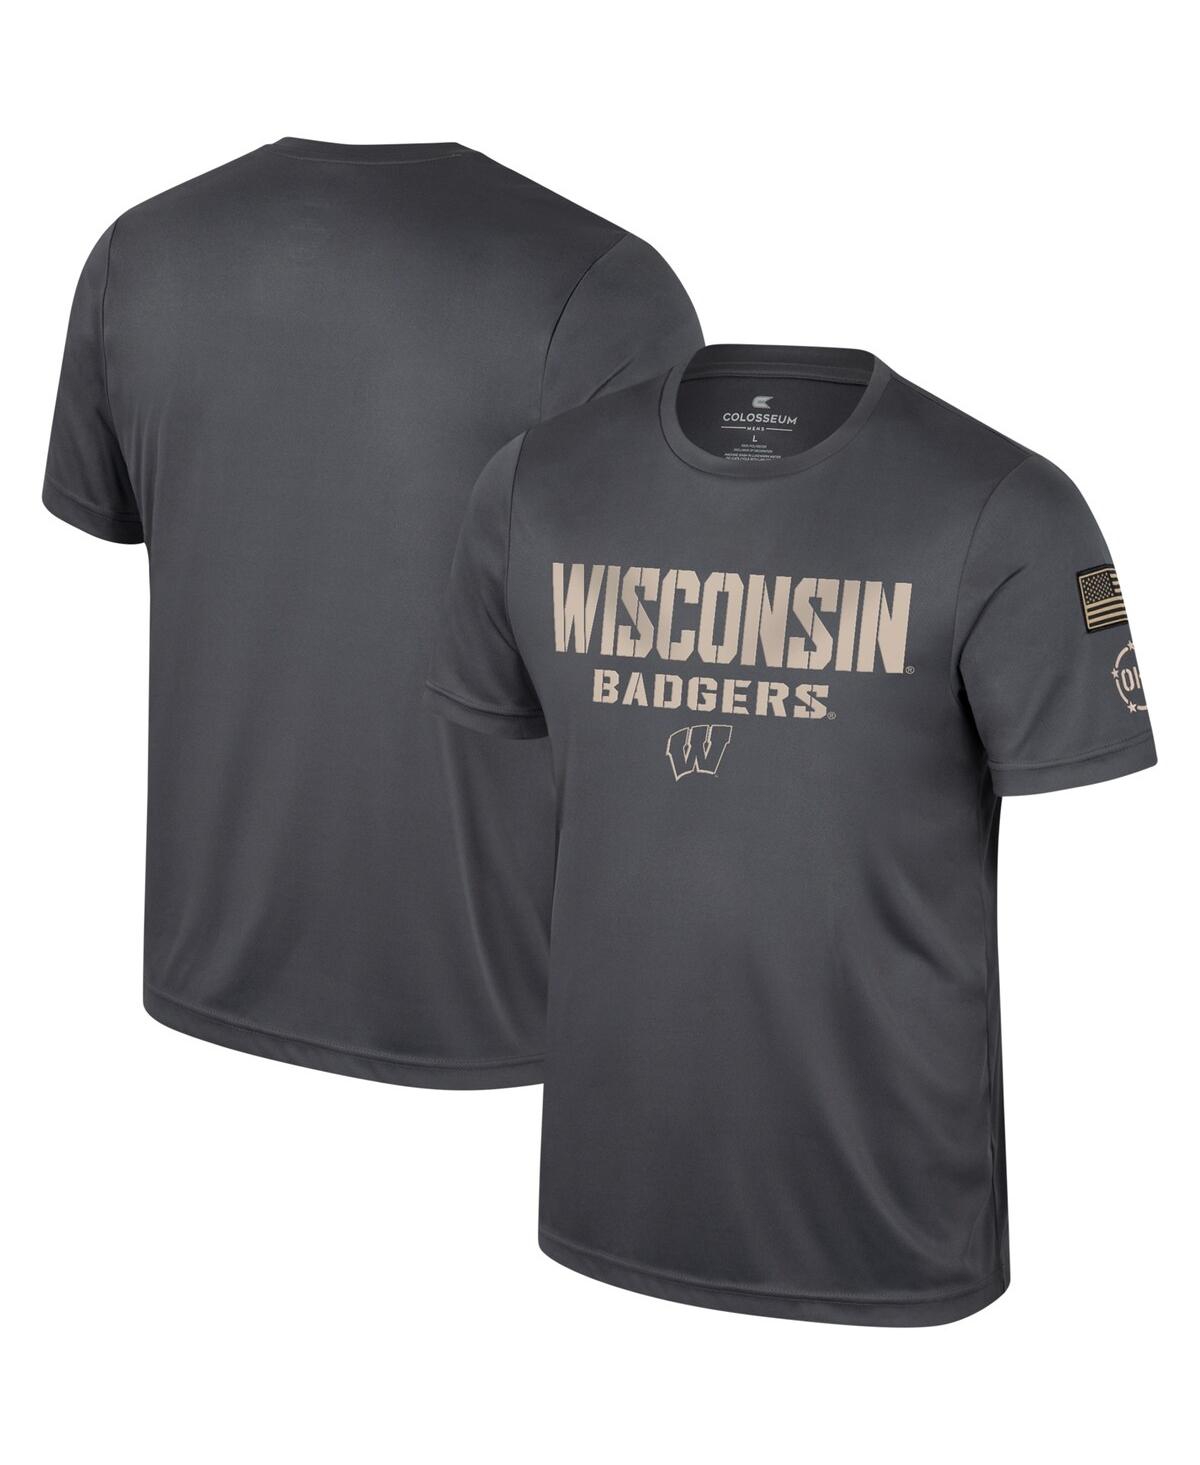 Colosseum Men's  Charcoal Wisconsin Badgers Oht Military-inspired Appreciation T-shirt